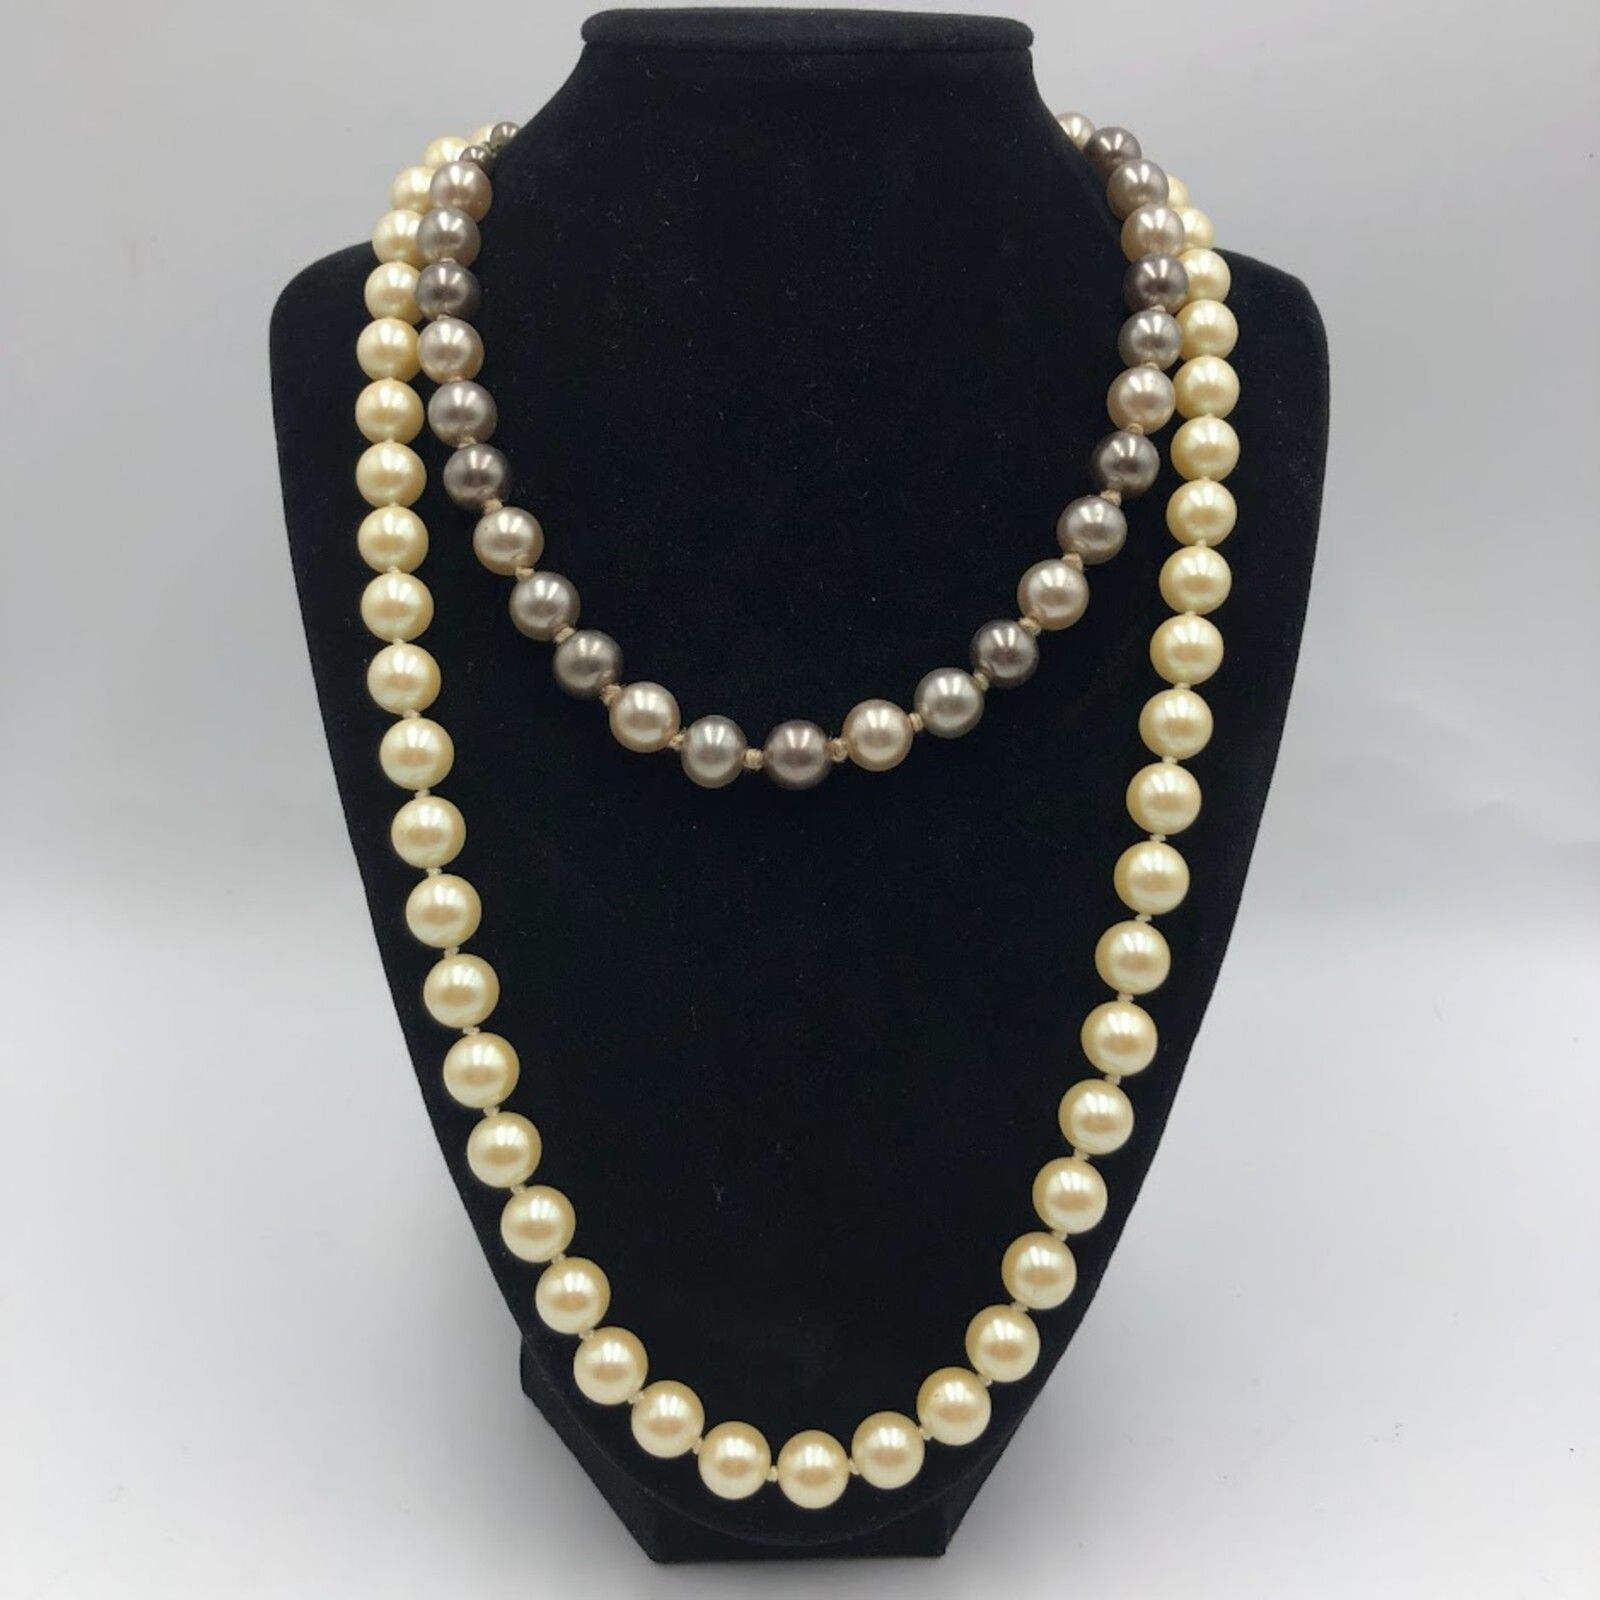 Vintage MCM Lot of 2 Faux Pearl Necklaces Pearl White and Grayish/Beige Japan - $29.68